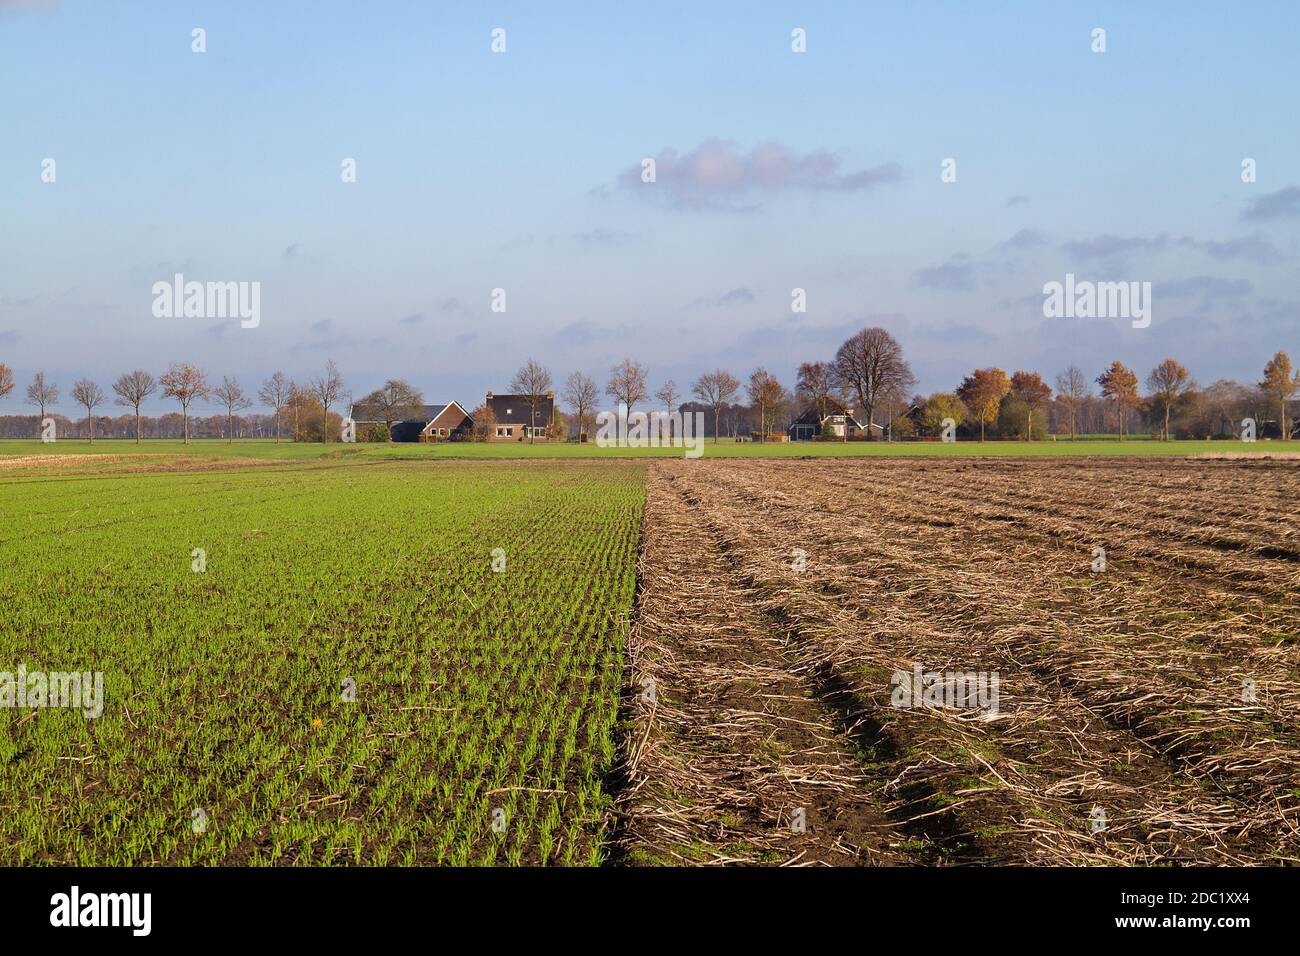 Crop rotation: young winter cereal, sown next to a harvested potato field in autumn Stock Photo